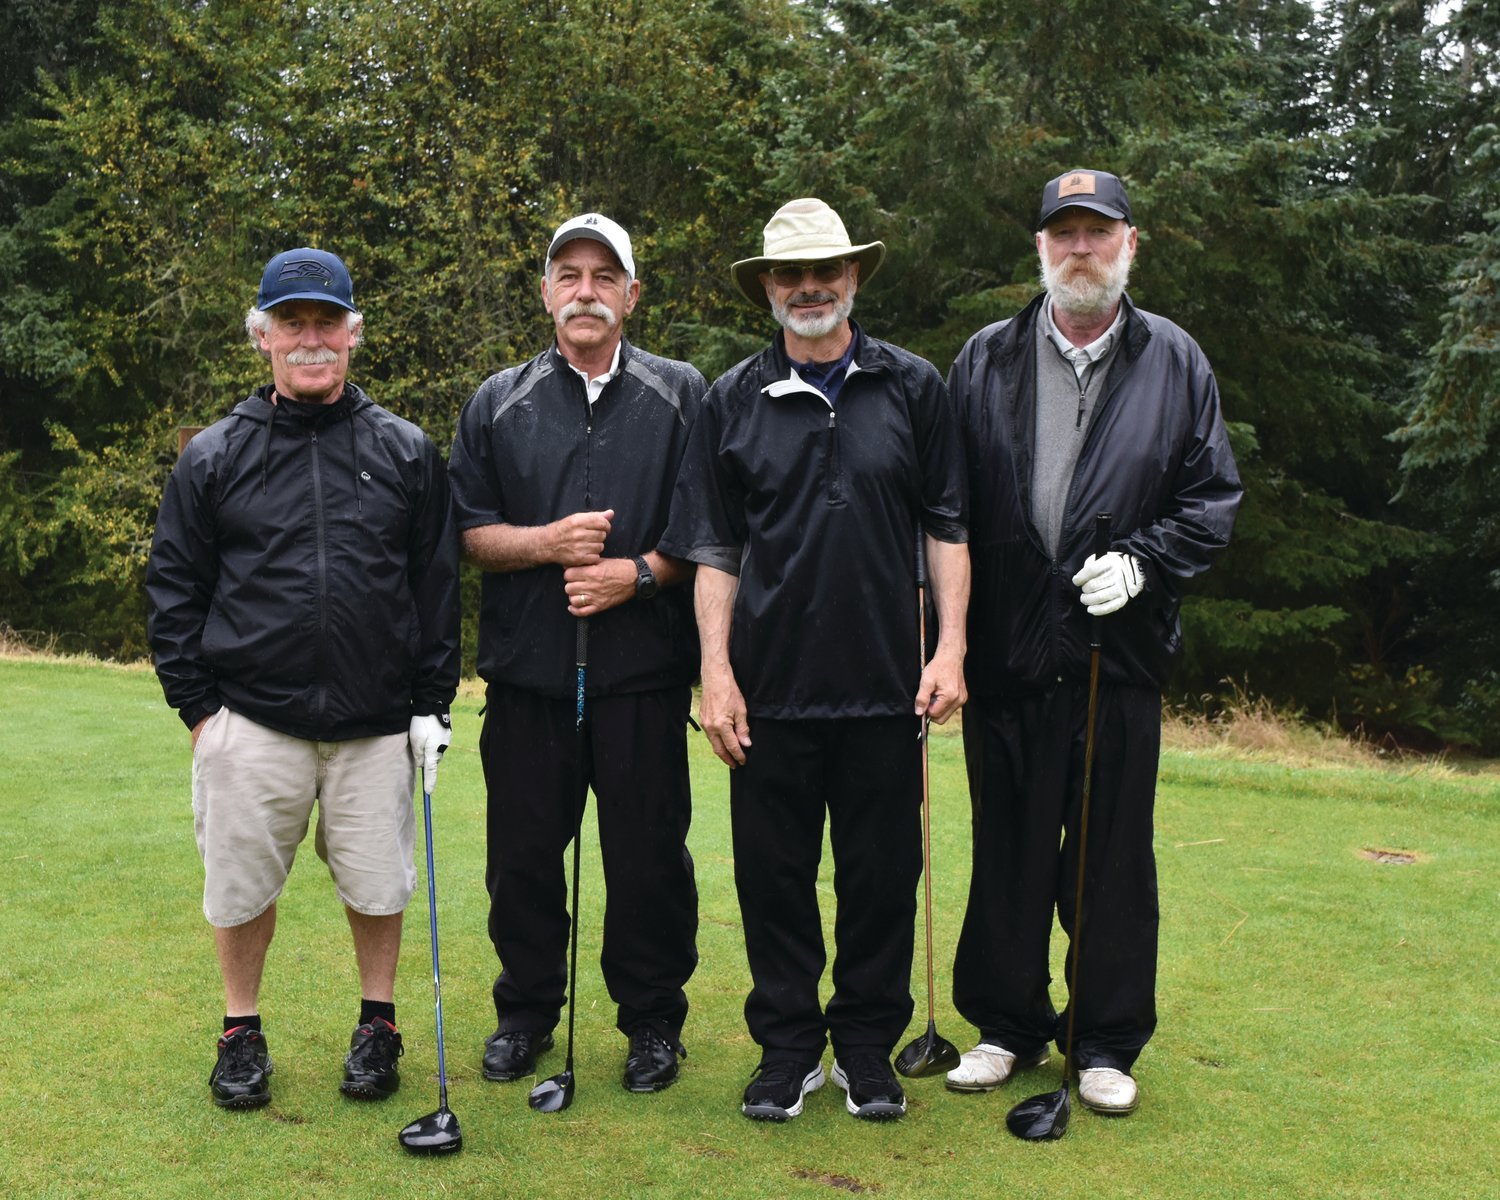 Richard Boyd, Greg Miller, George Cave, and Mike Martin won first place in the men’s division of the Dove House Golf Tournament.